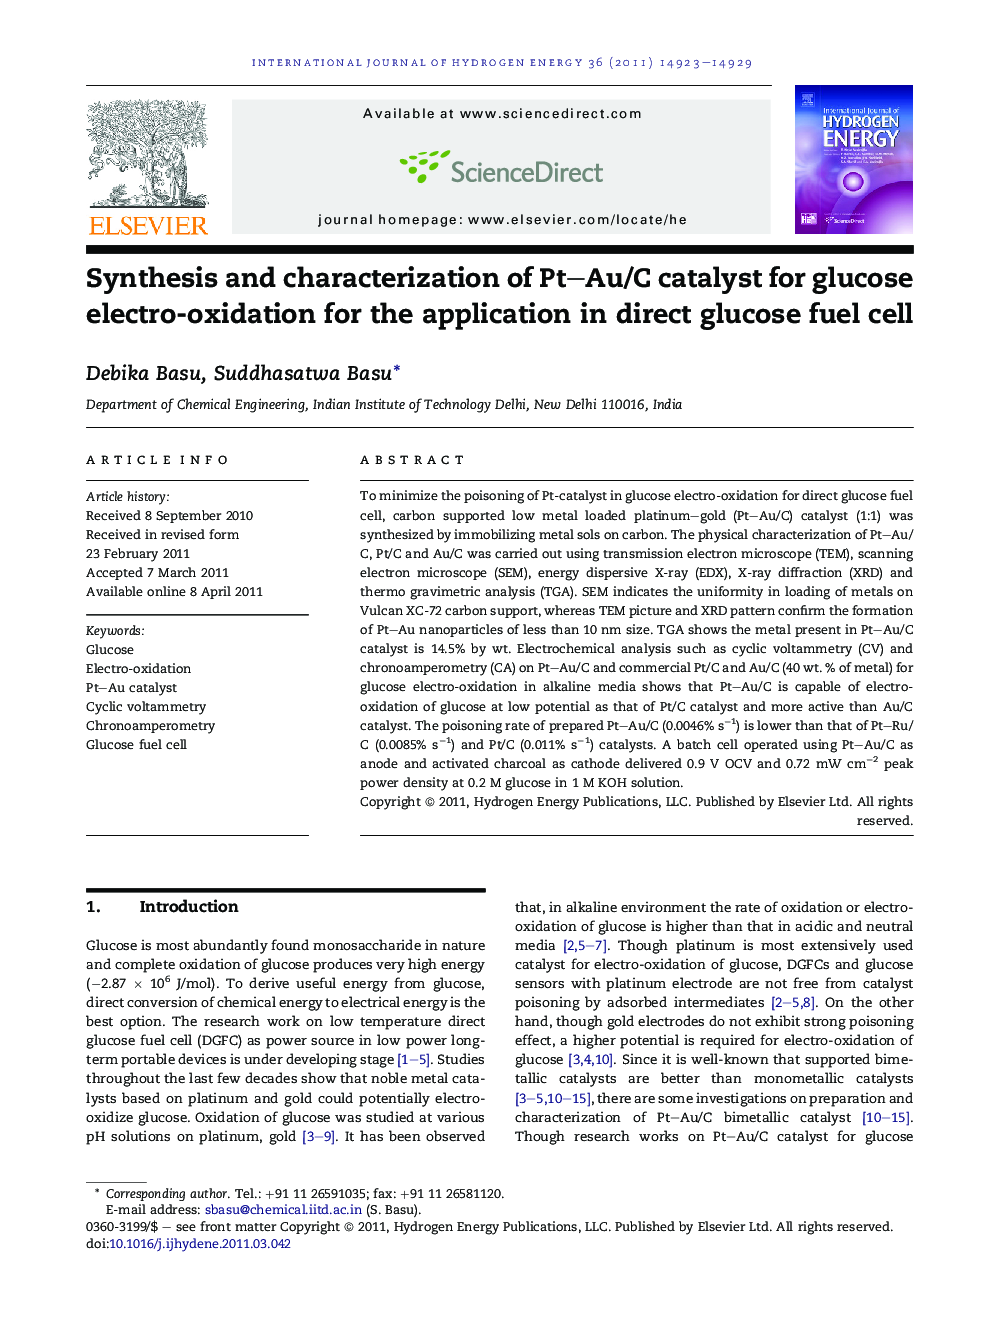 Synthesis and characterization of Pt–Au/C catalyst for glucose electro-oxidation for the application in direct glucose fuel cell